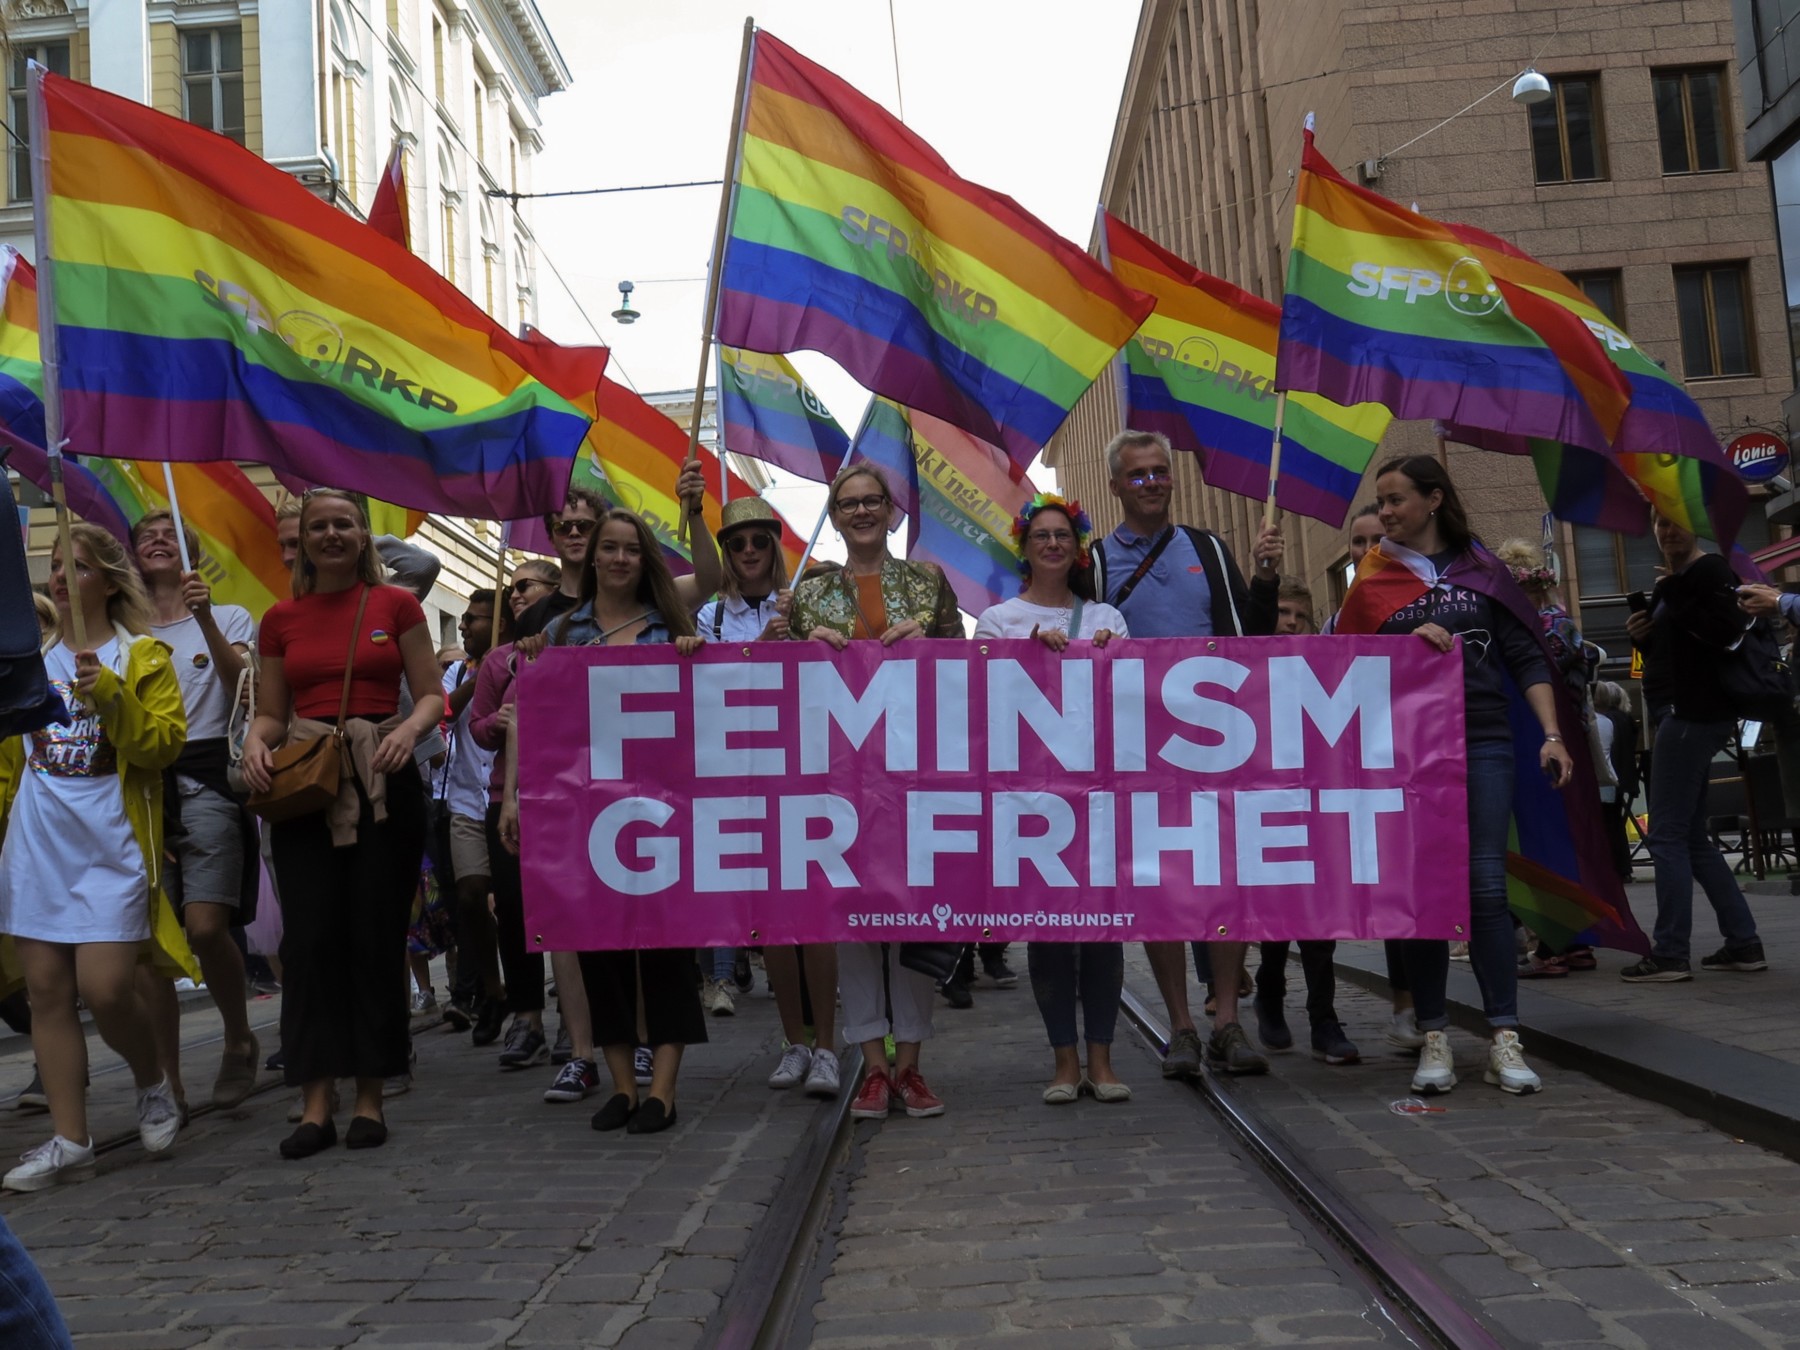 Helsinki Pride Parade – a party for all - thisisFINLAND